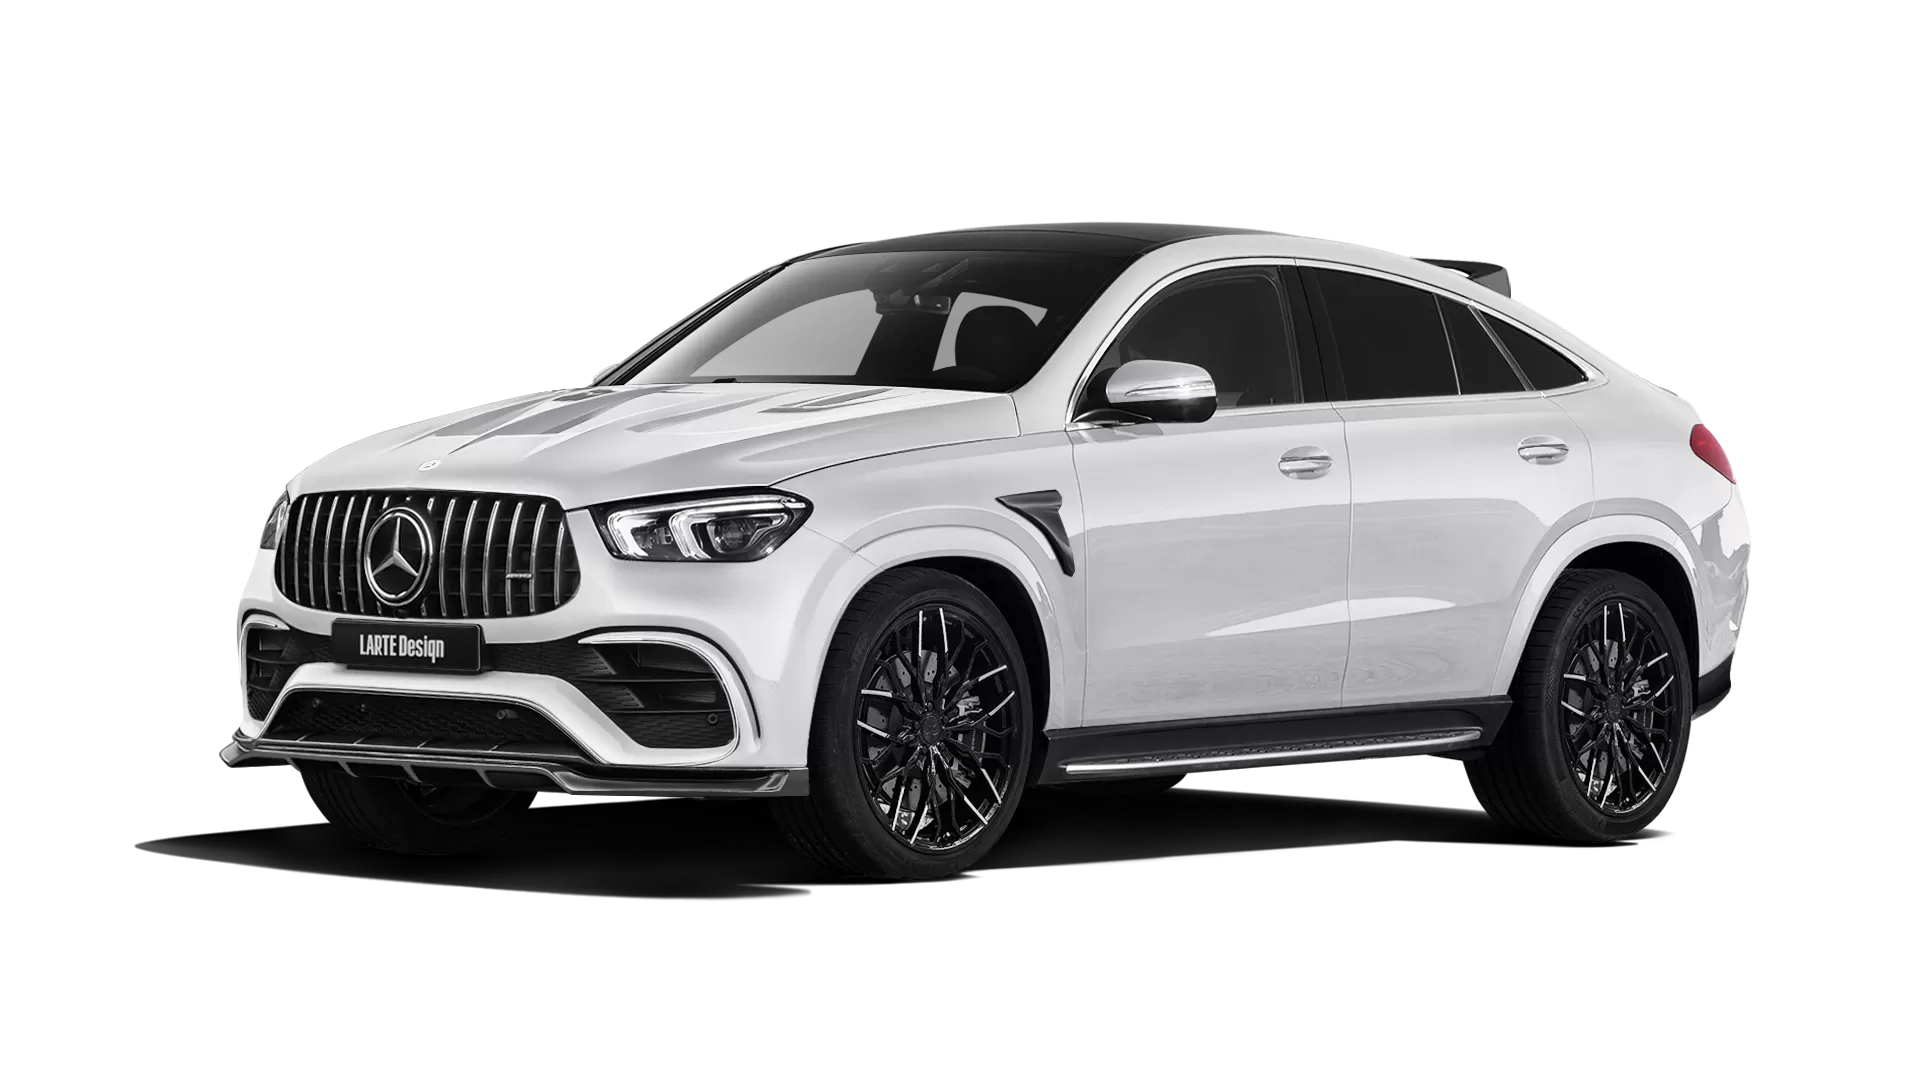 Mercedes GLE Coupe AMG 63 C167 with painted body kit: front view shown in Polar White